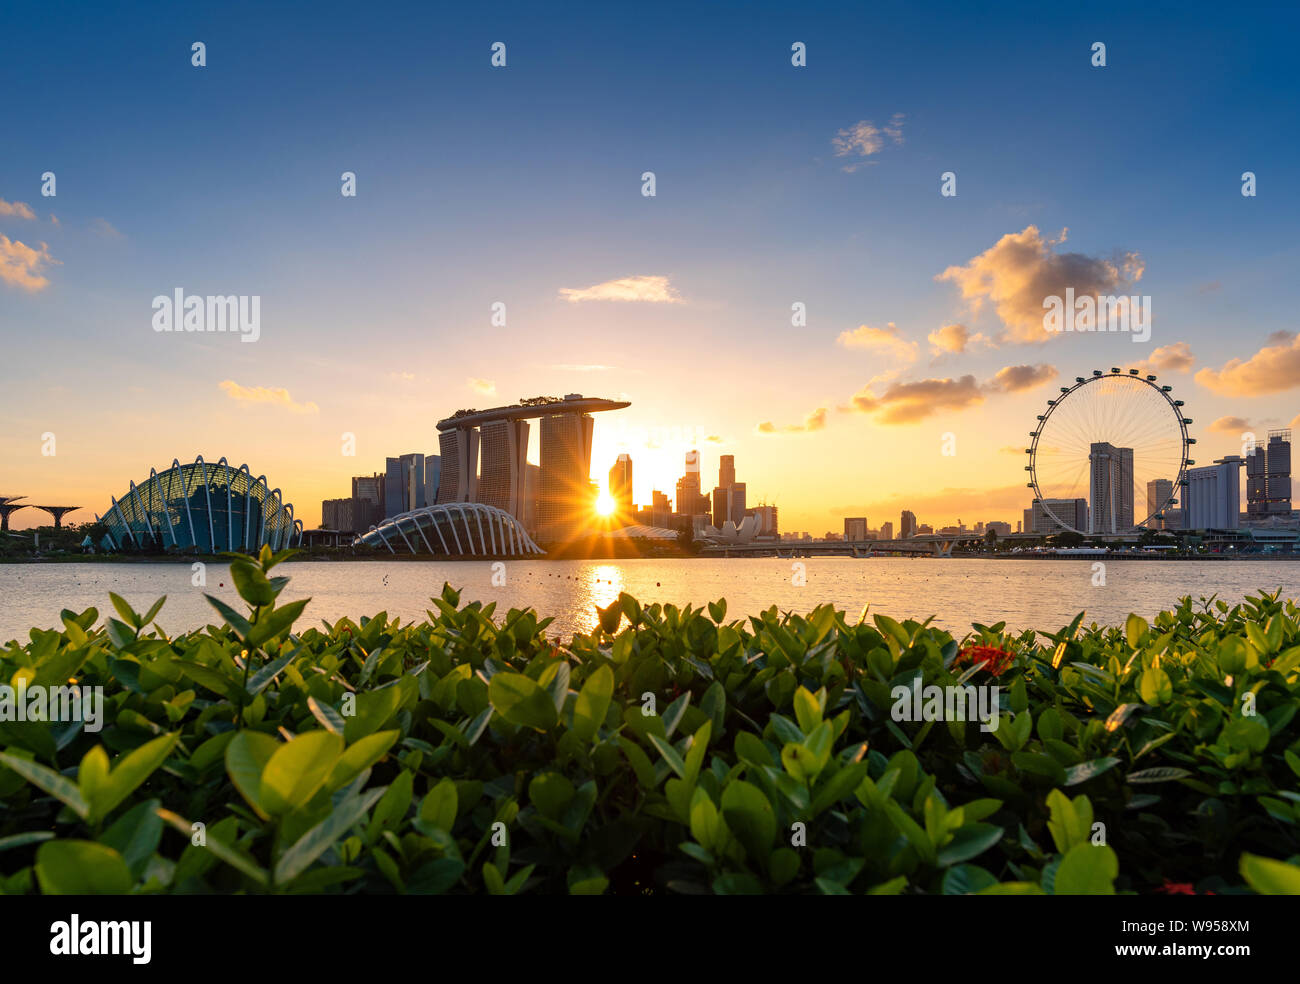 Urban downtown business buildings area at sunset in Singapore.Singapore is a world famous tourist city. Stock Photo